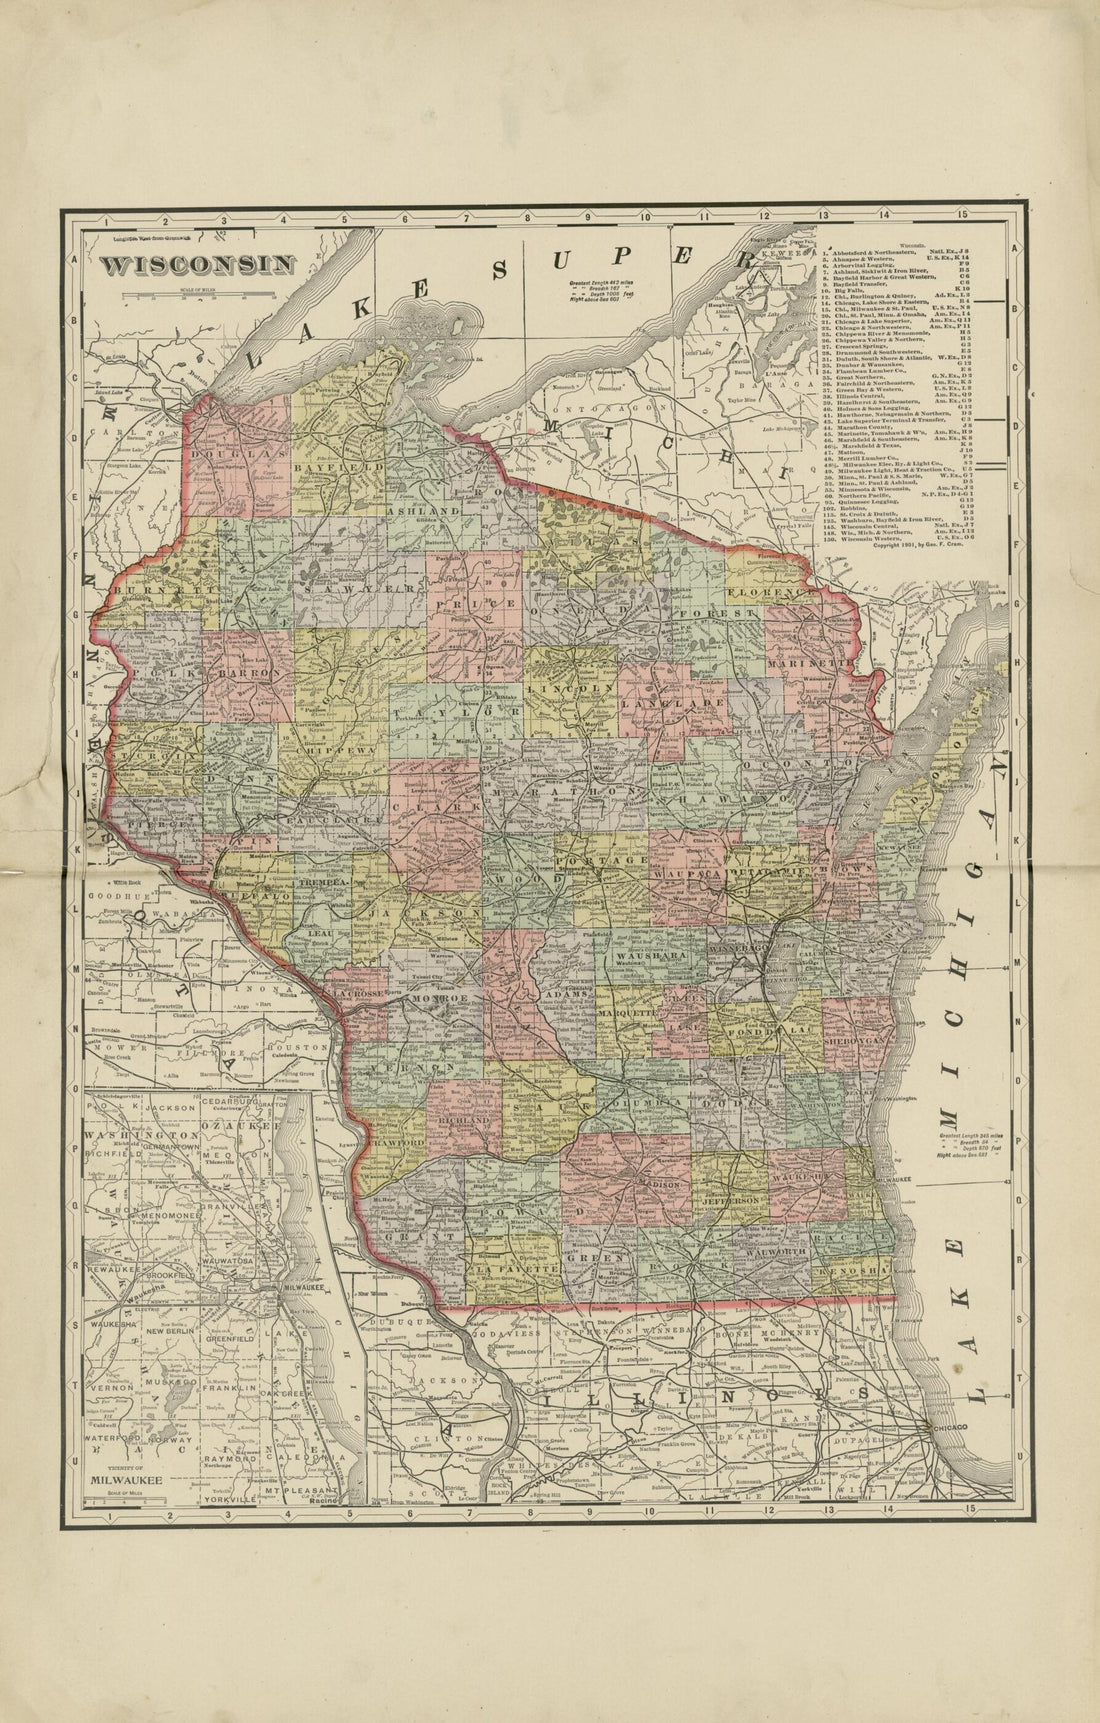 This old map of Wisconsin from Plat Book of Washington and Ozaukee Counties, Wisconsin from 1915 was created by Albert Volk in 1915